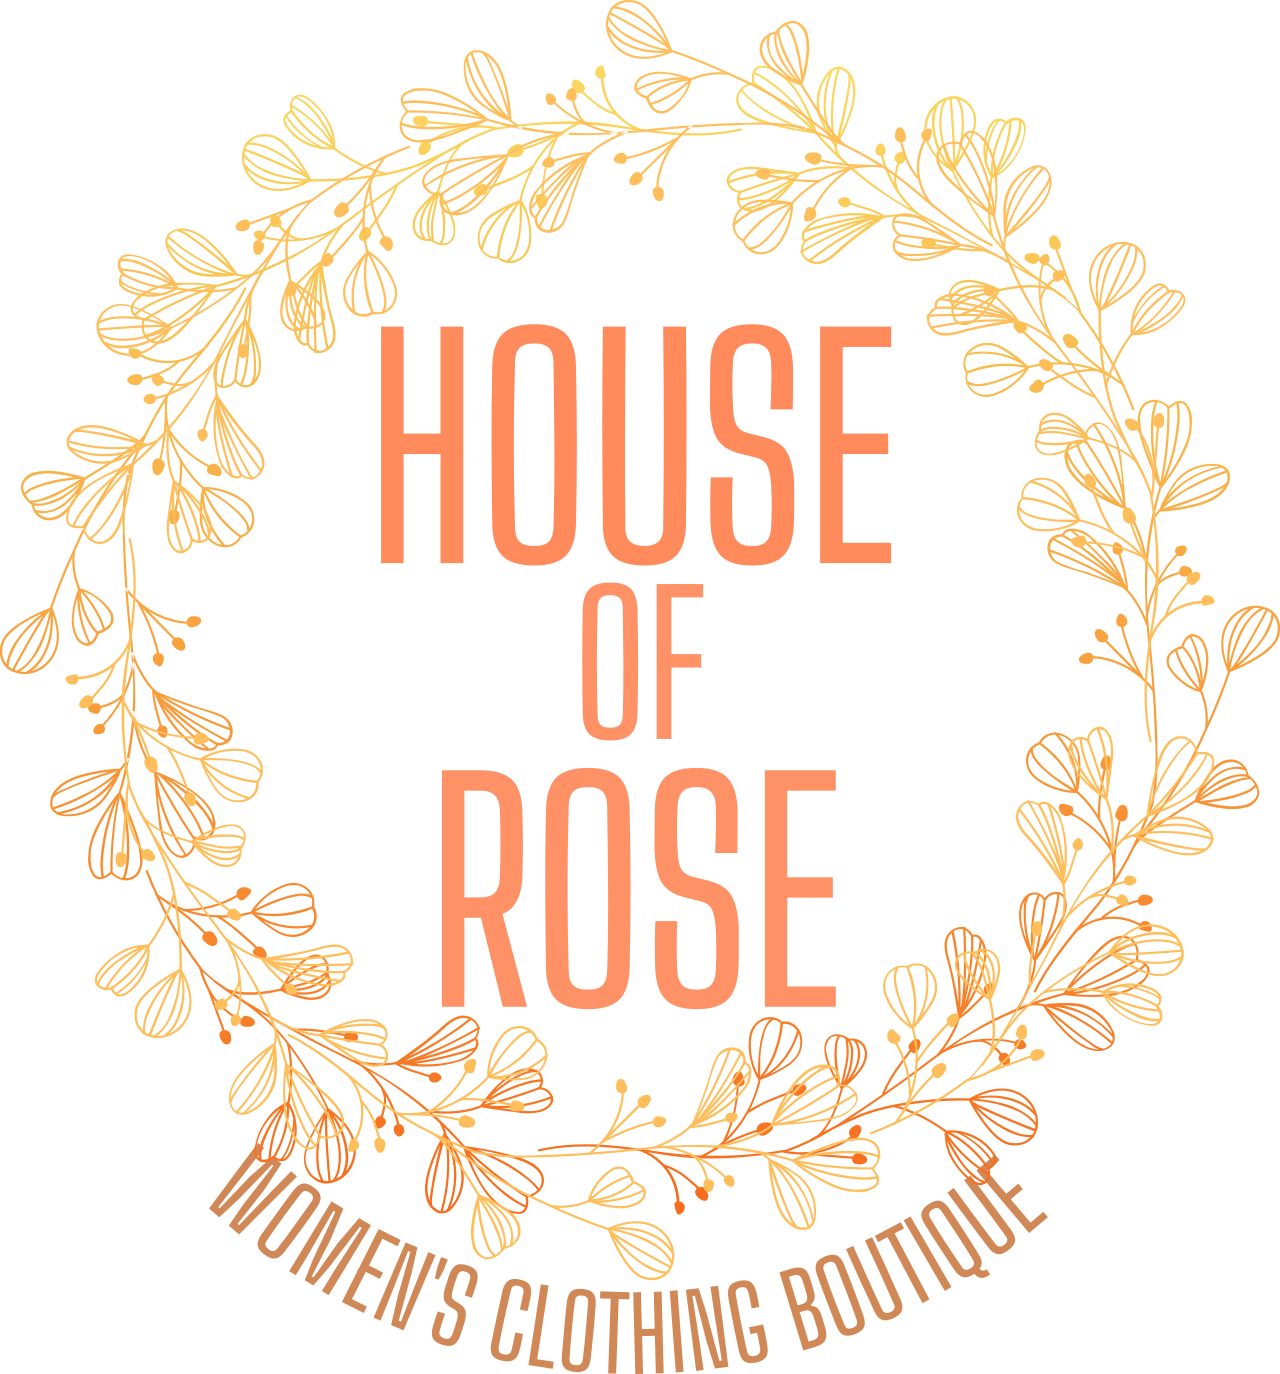 HOUSE 's web page